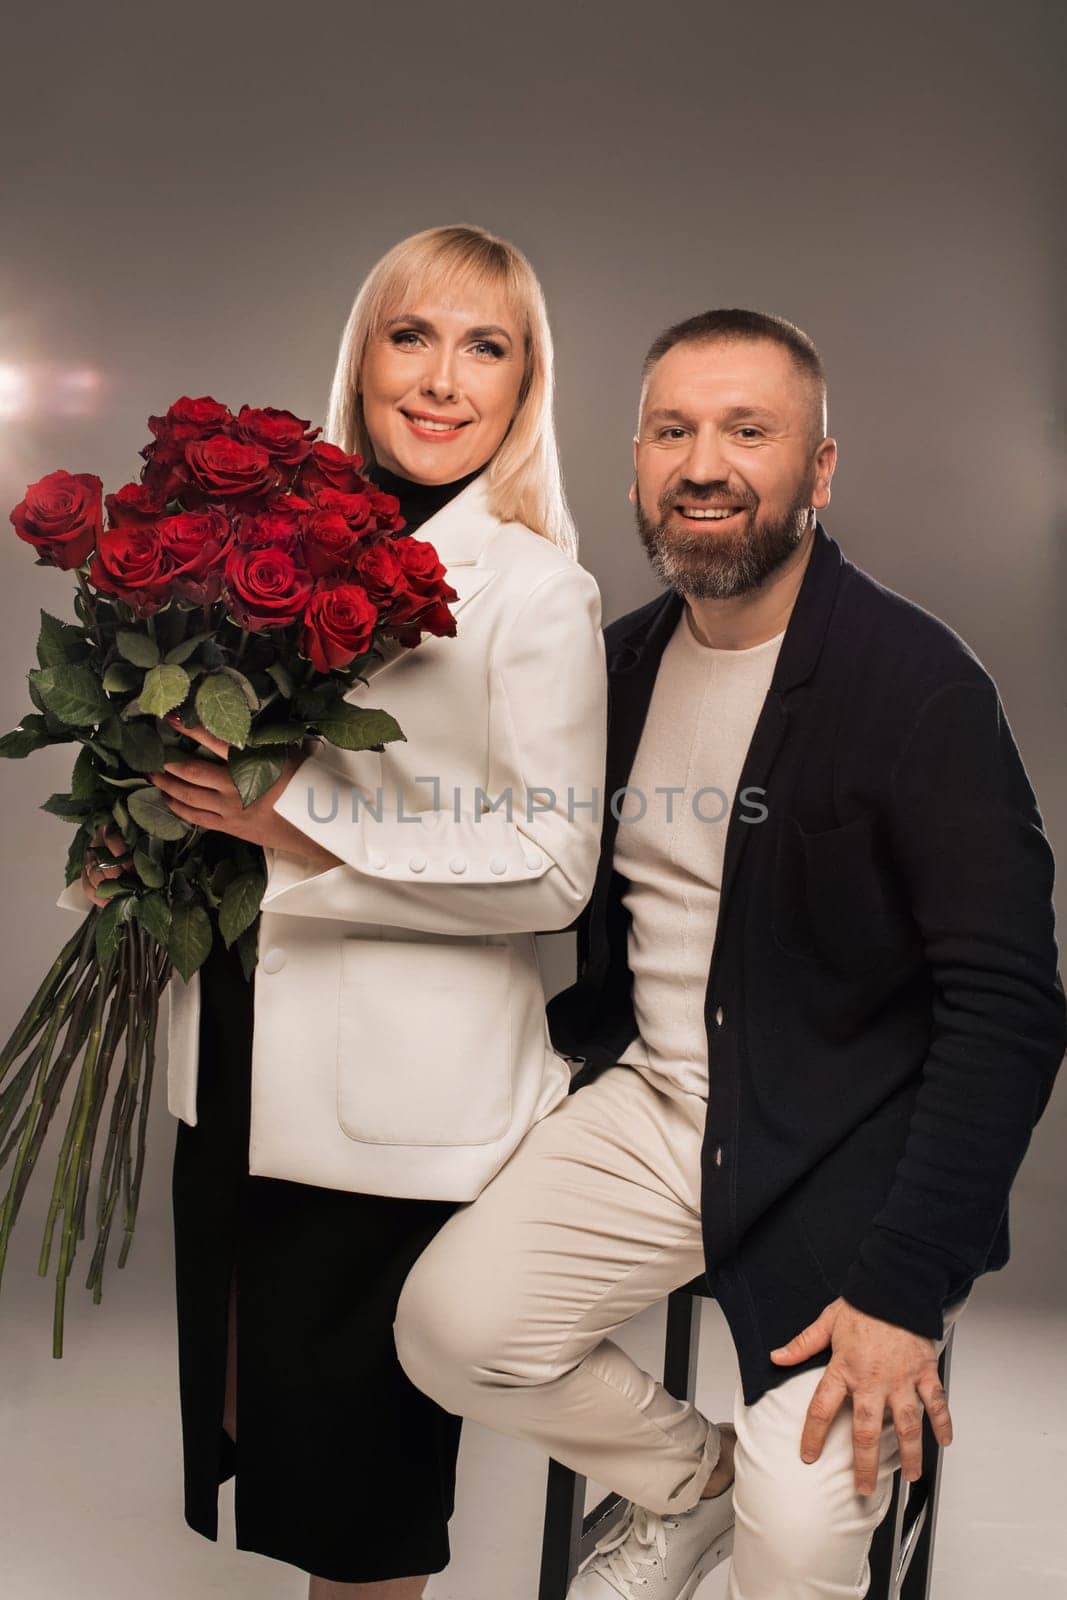 A man and a woman with flowers in their hands in strict clothes pose in the background in the studio.